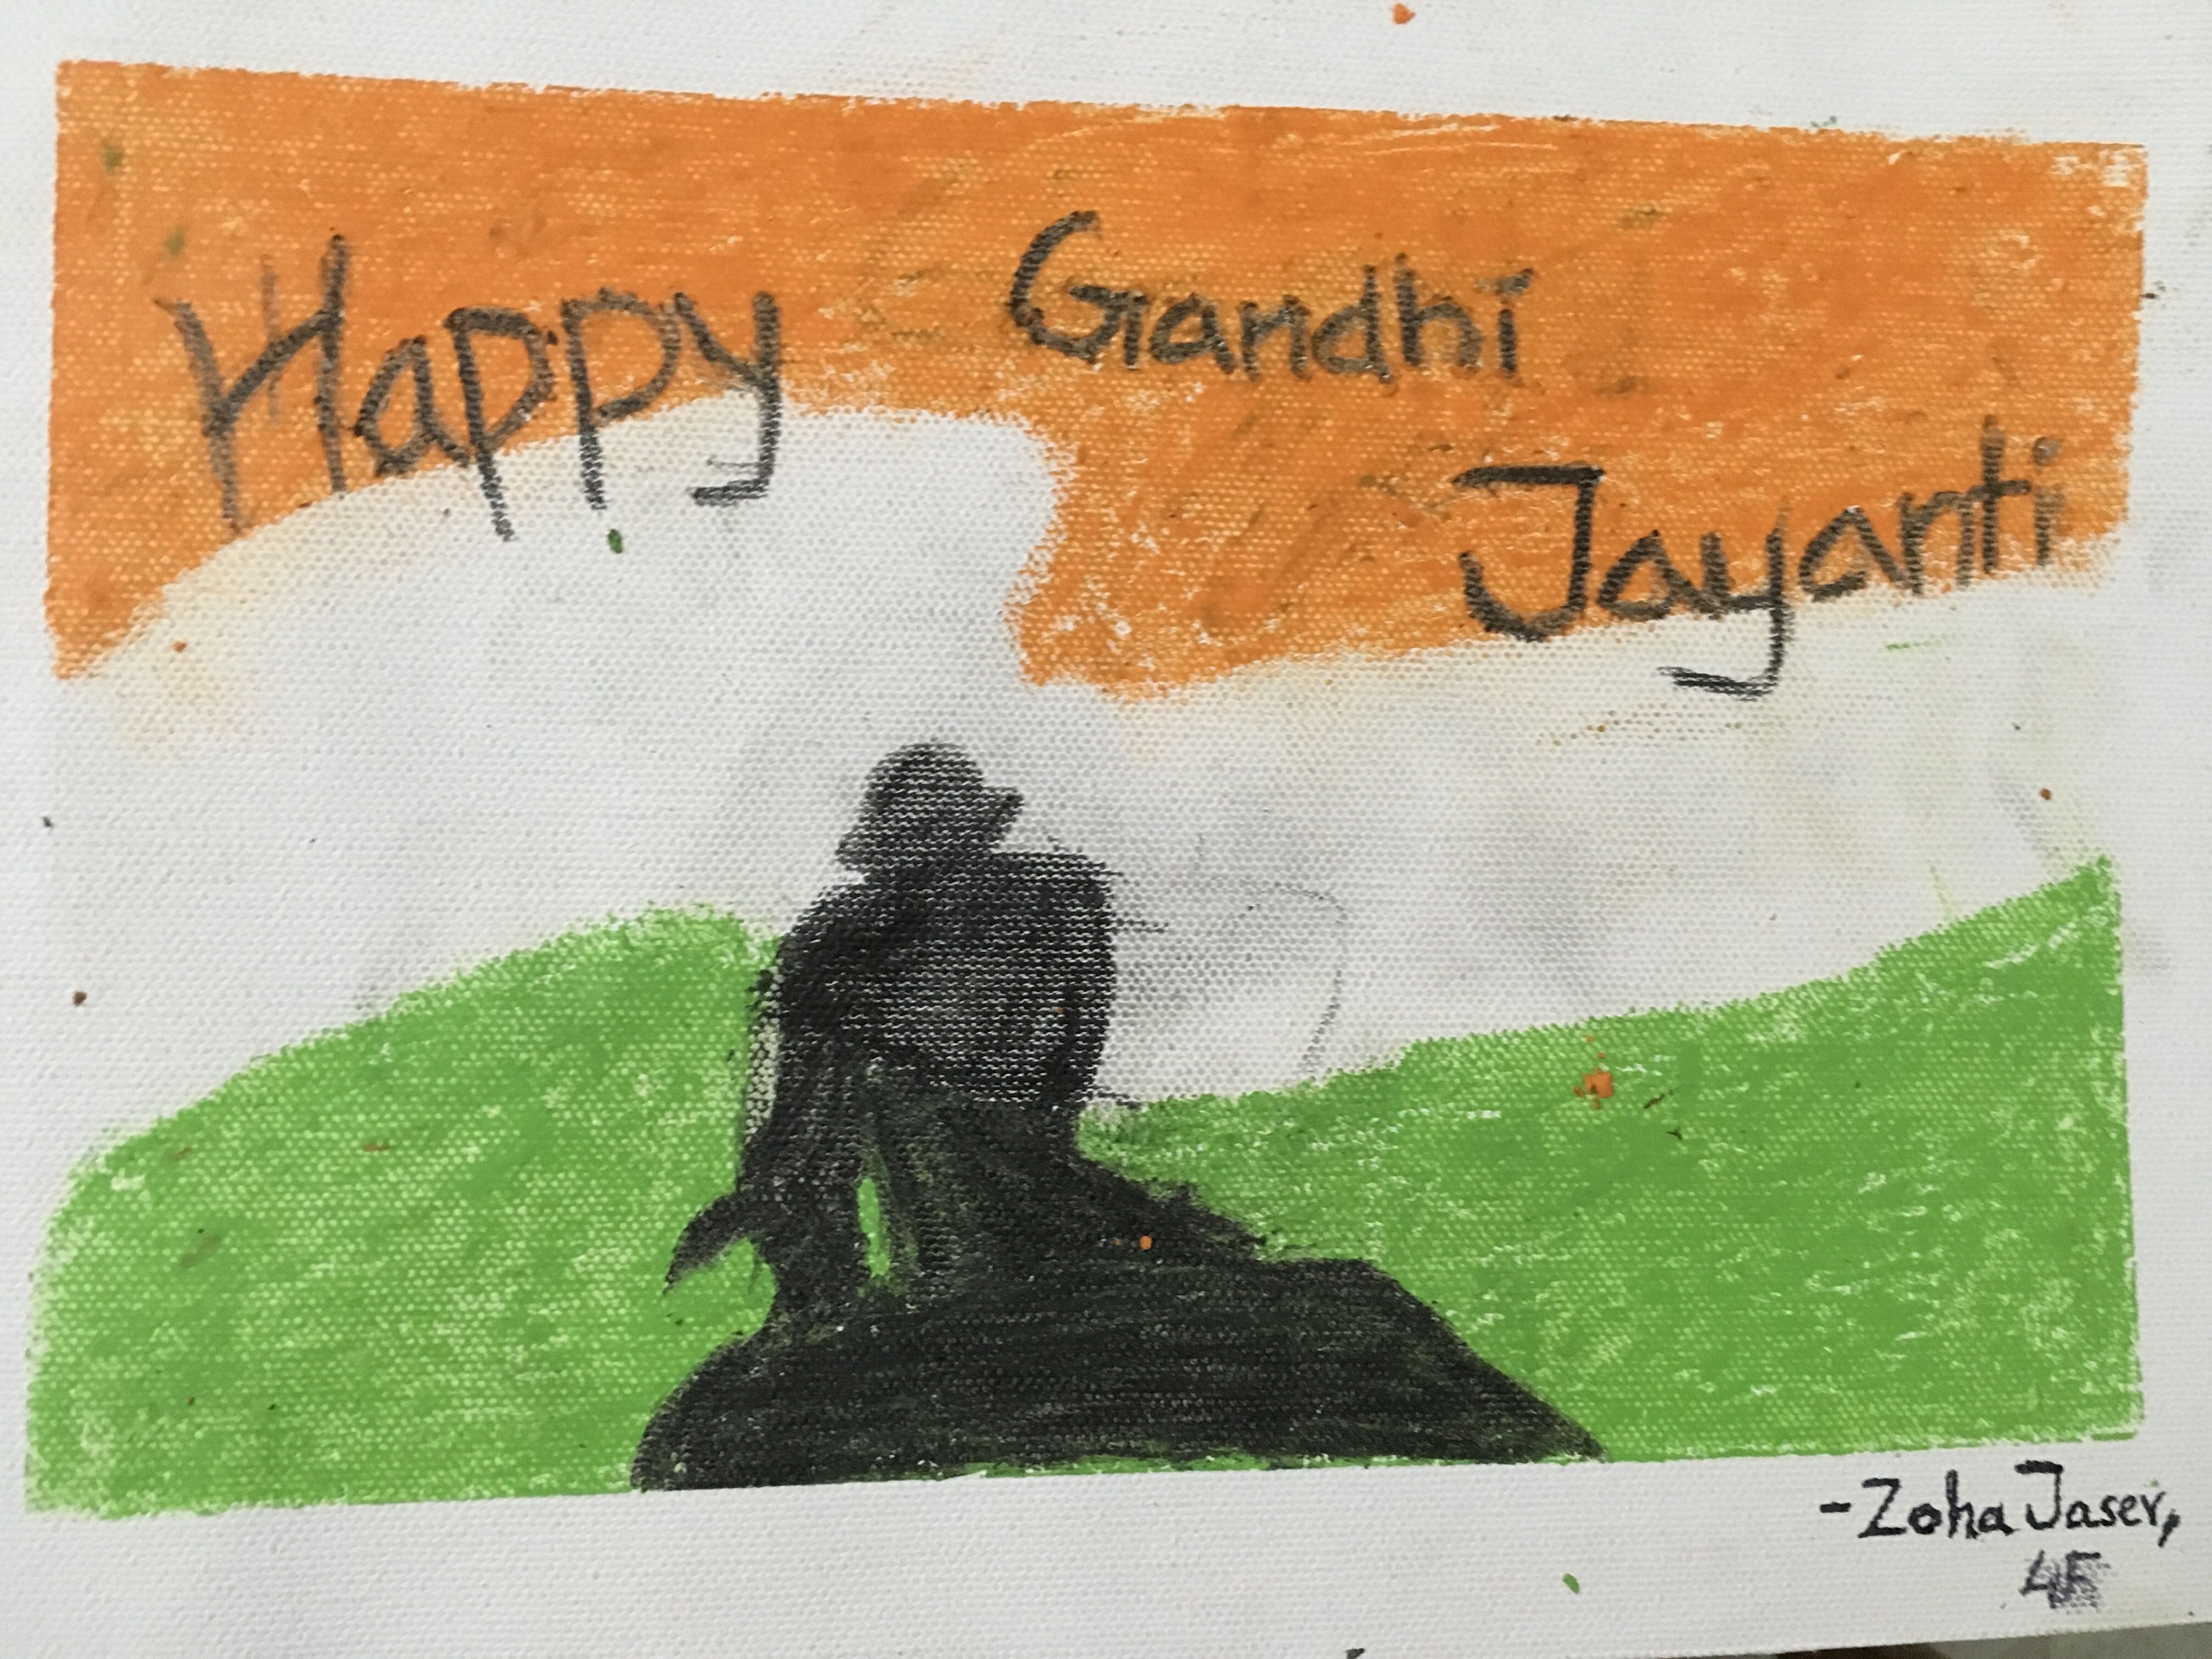 Gandhi Bapu Jayanti Images Projects | Photos, videos, logos, illustrations  and branding on Behance